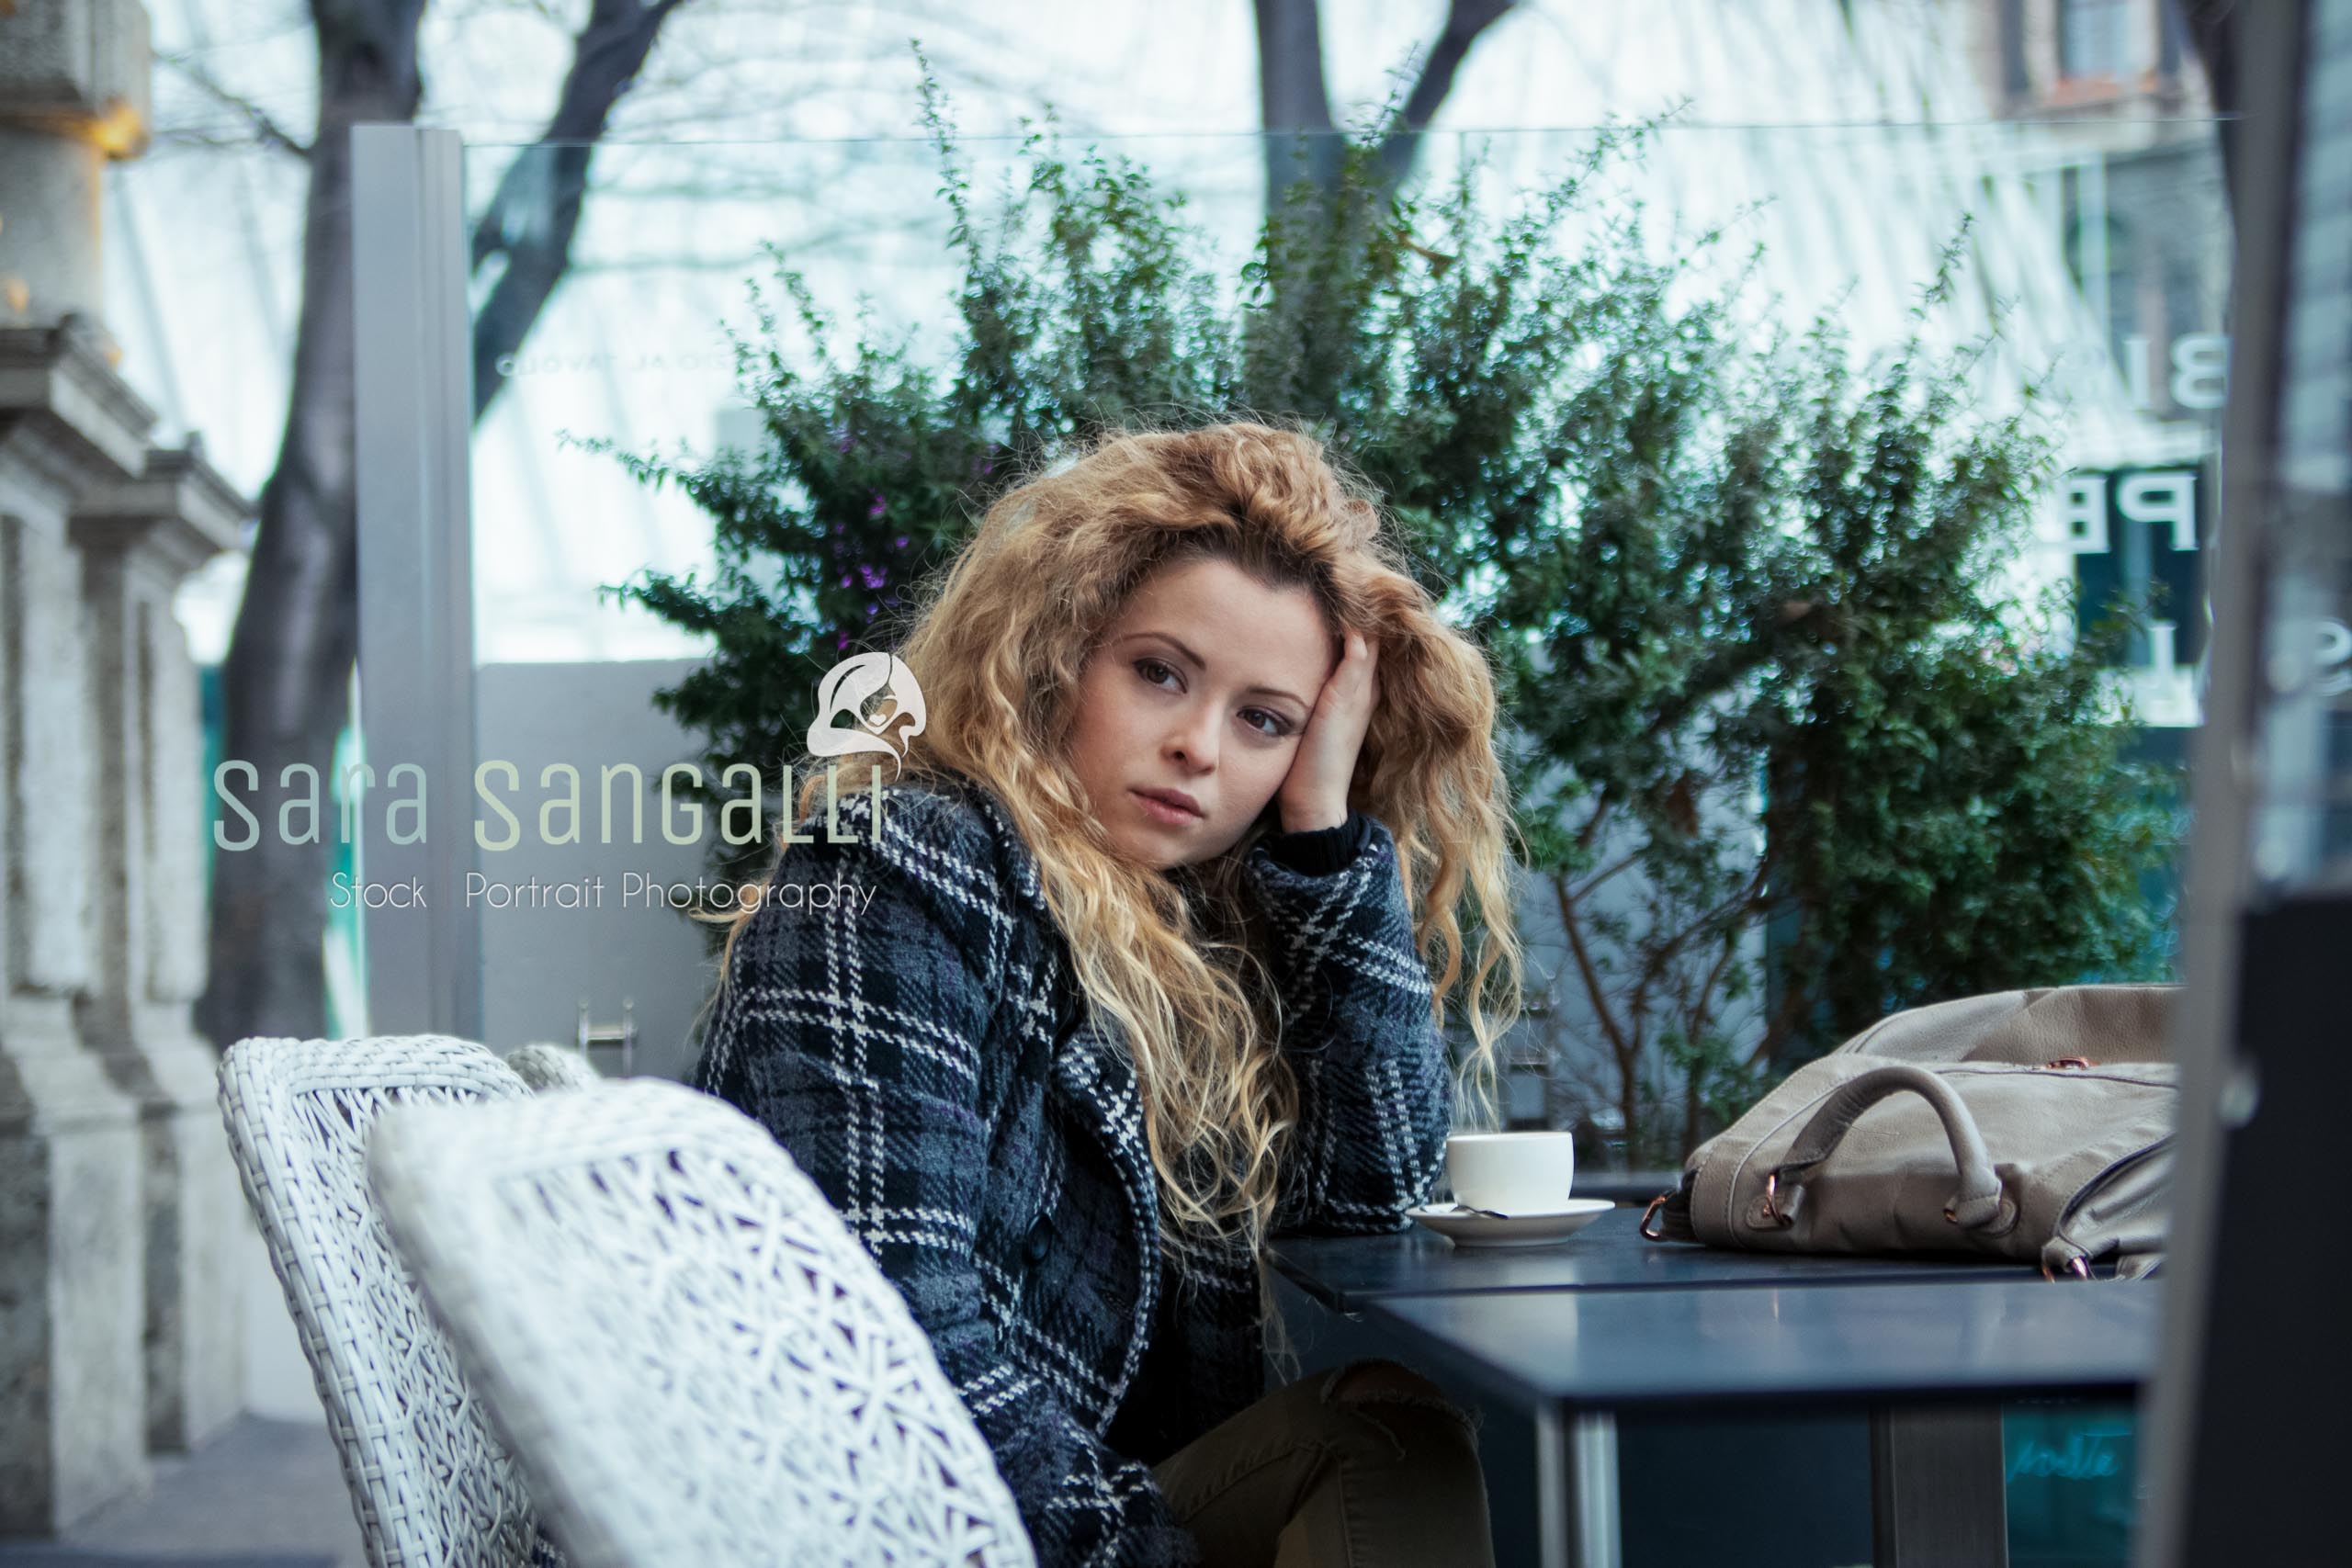 Young blonde woman taking a break at a coffee bar. Serious expression, looking away.